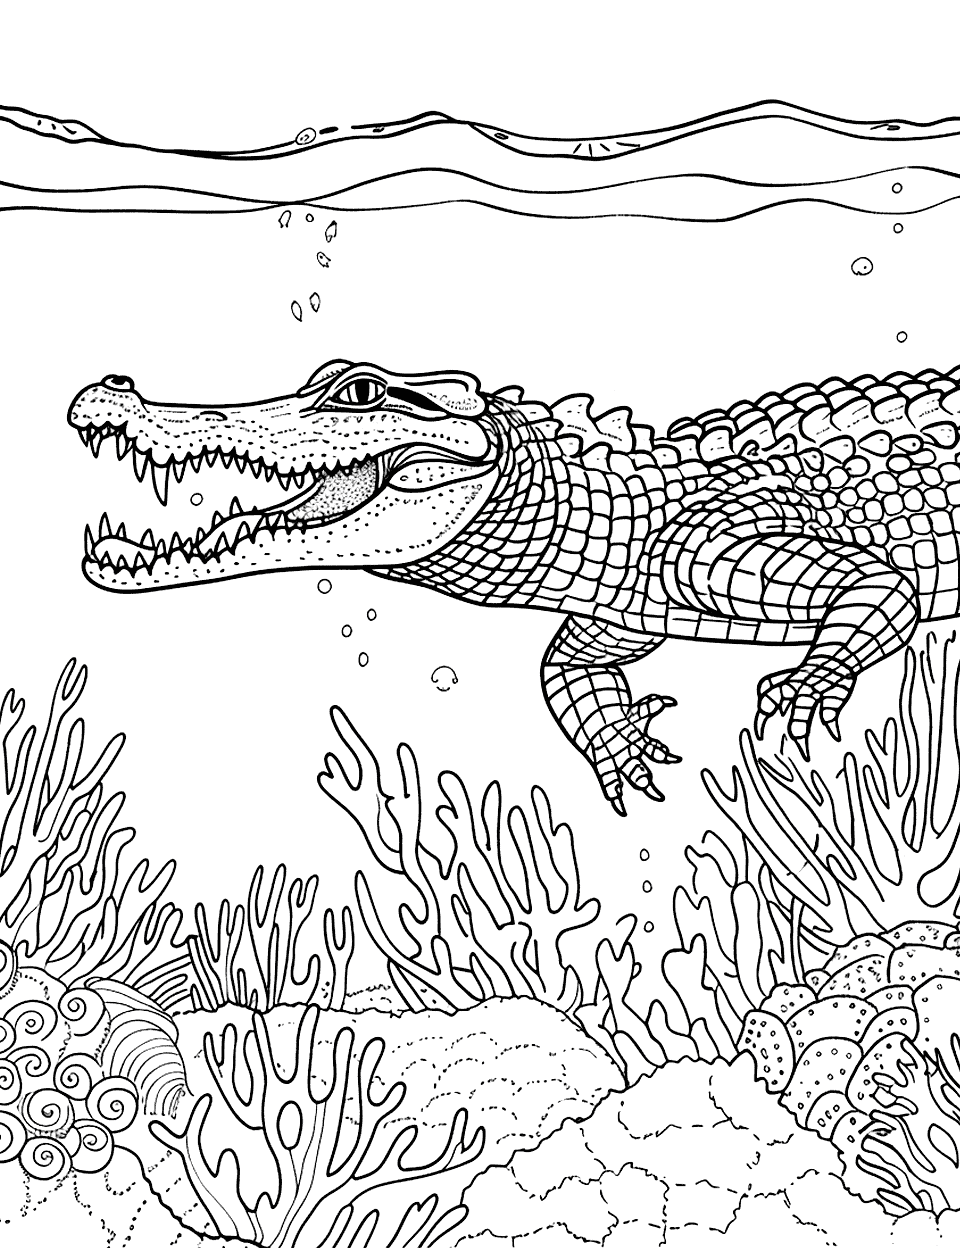 Crocodile Under the Sea Coloring Page - A saltwater crocodile swimming near the ocean floor surrounded by coral reefs.